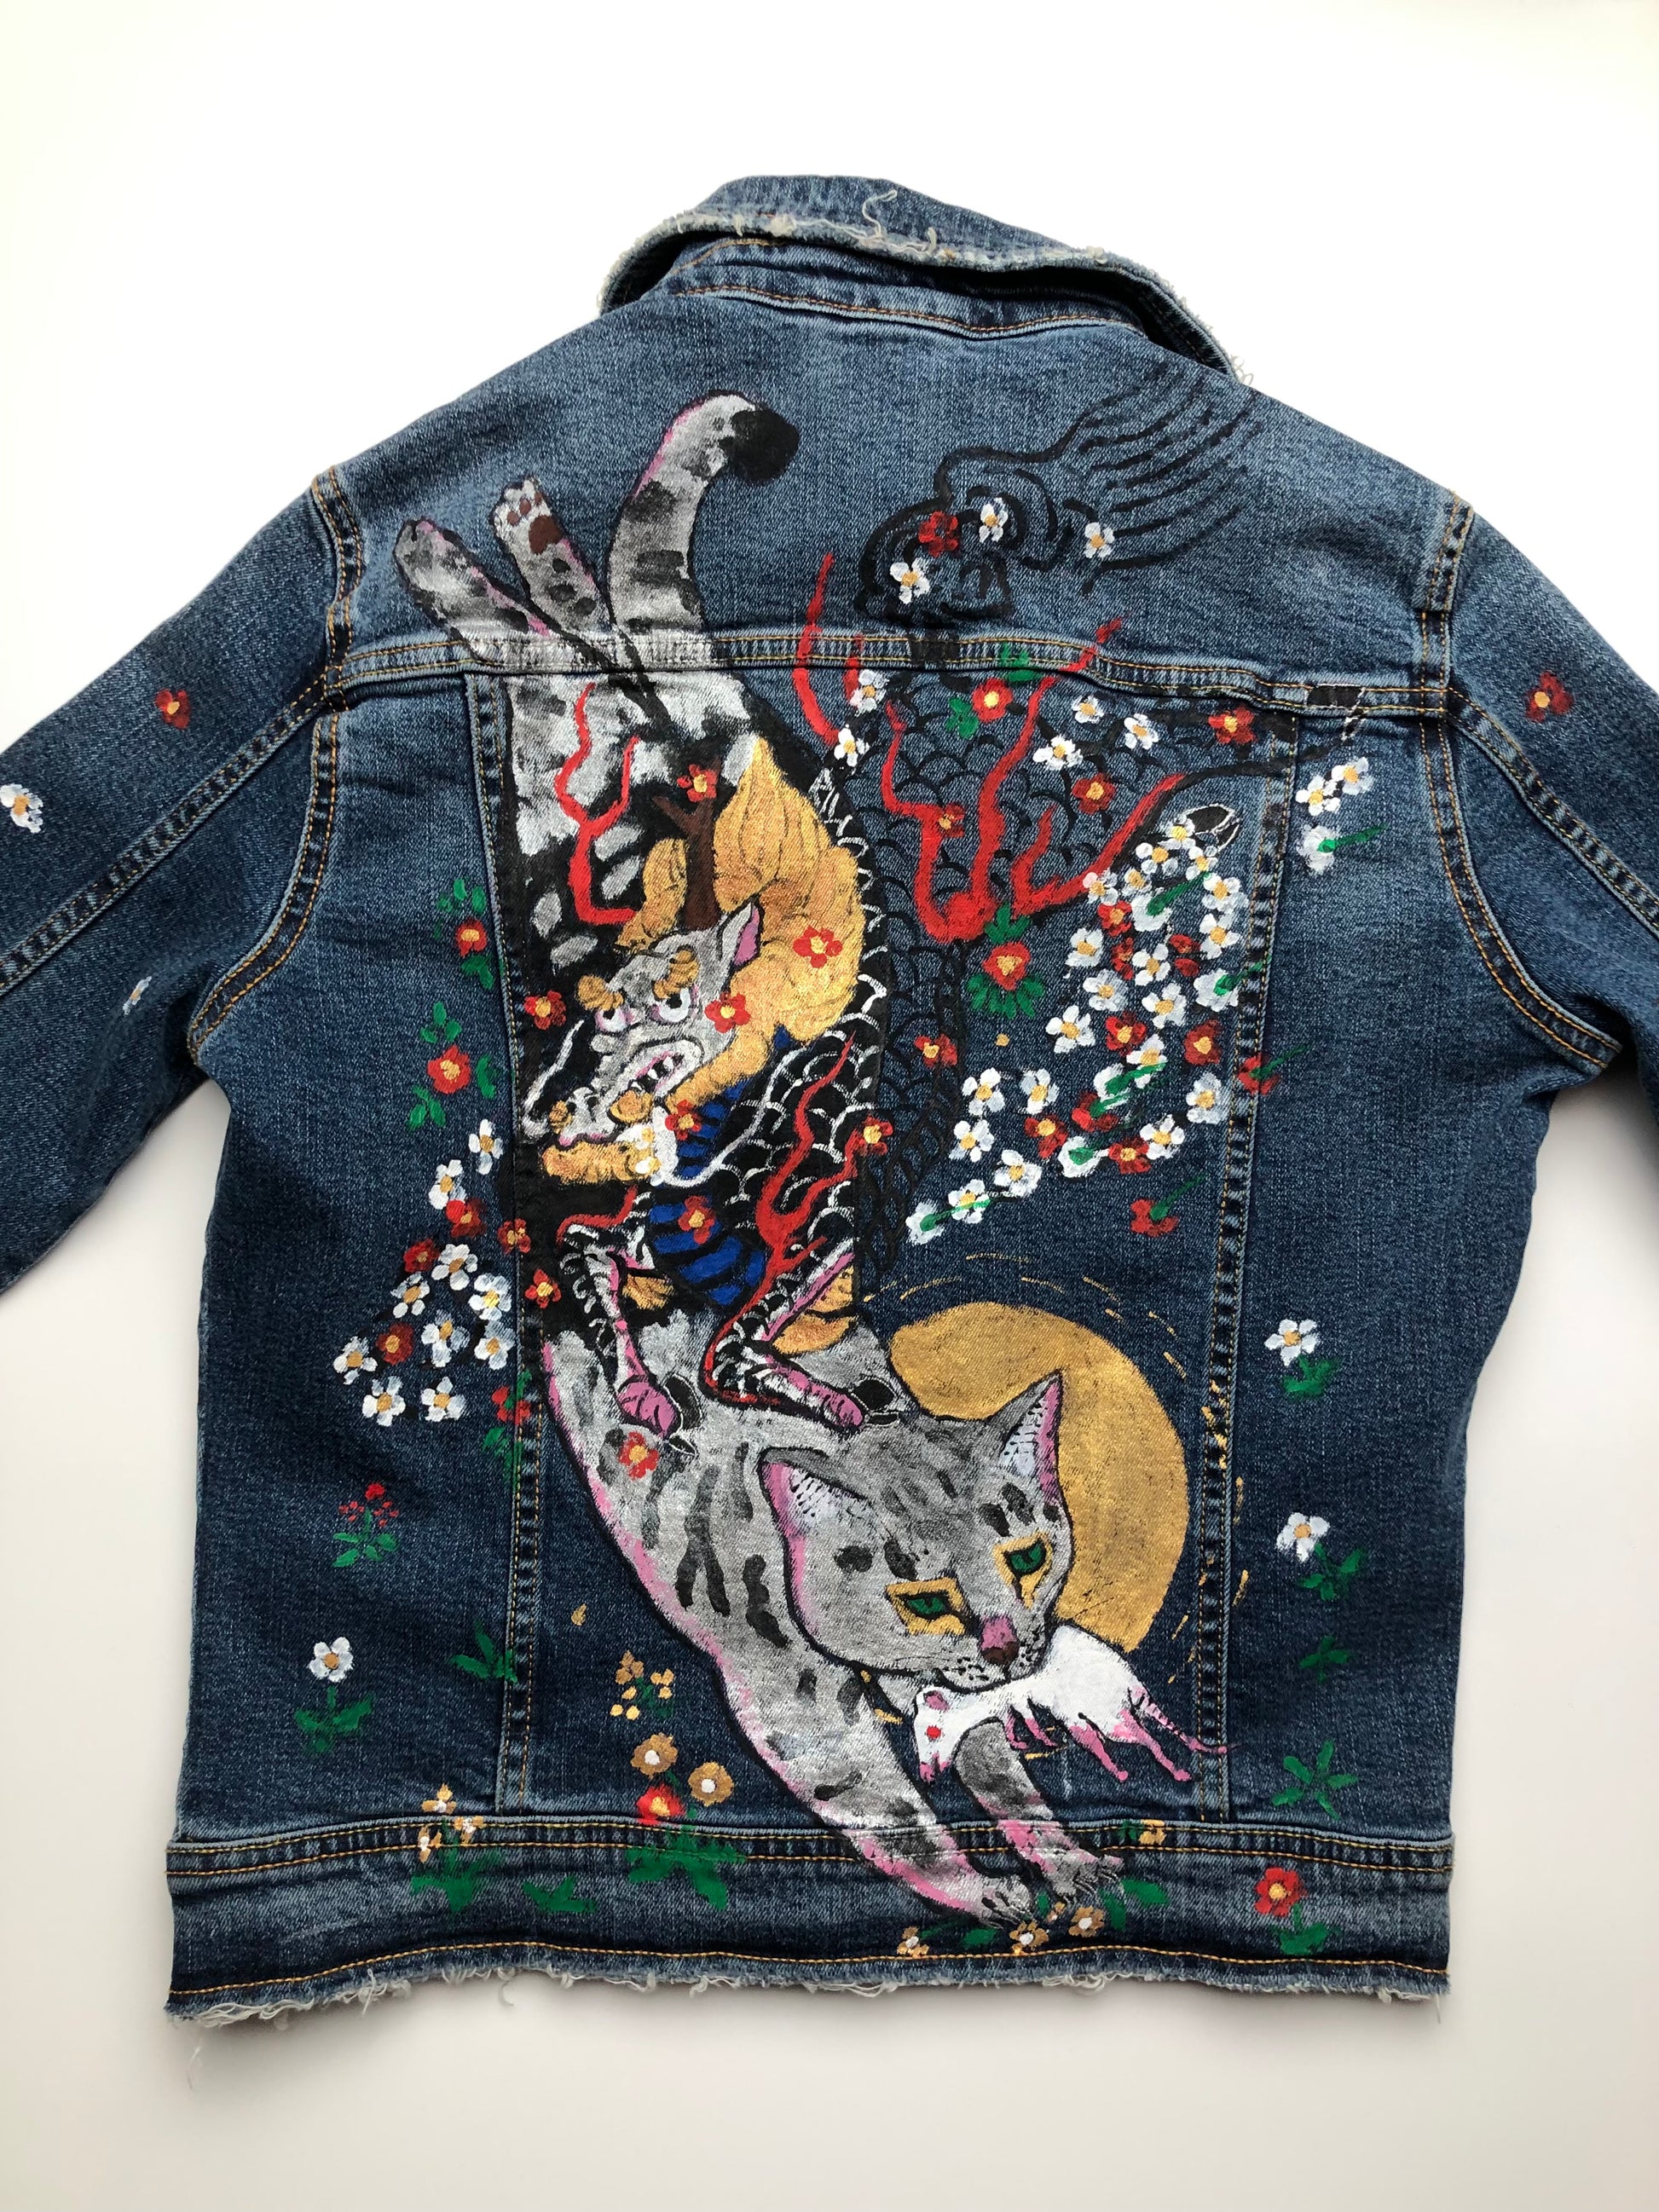 A scary cat with a demon on the back on a women's denim jacket